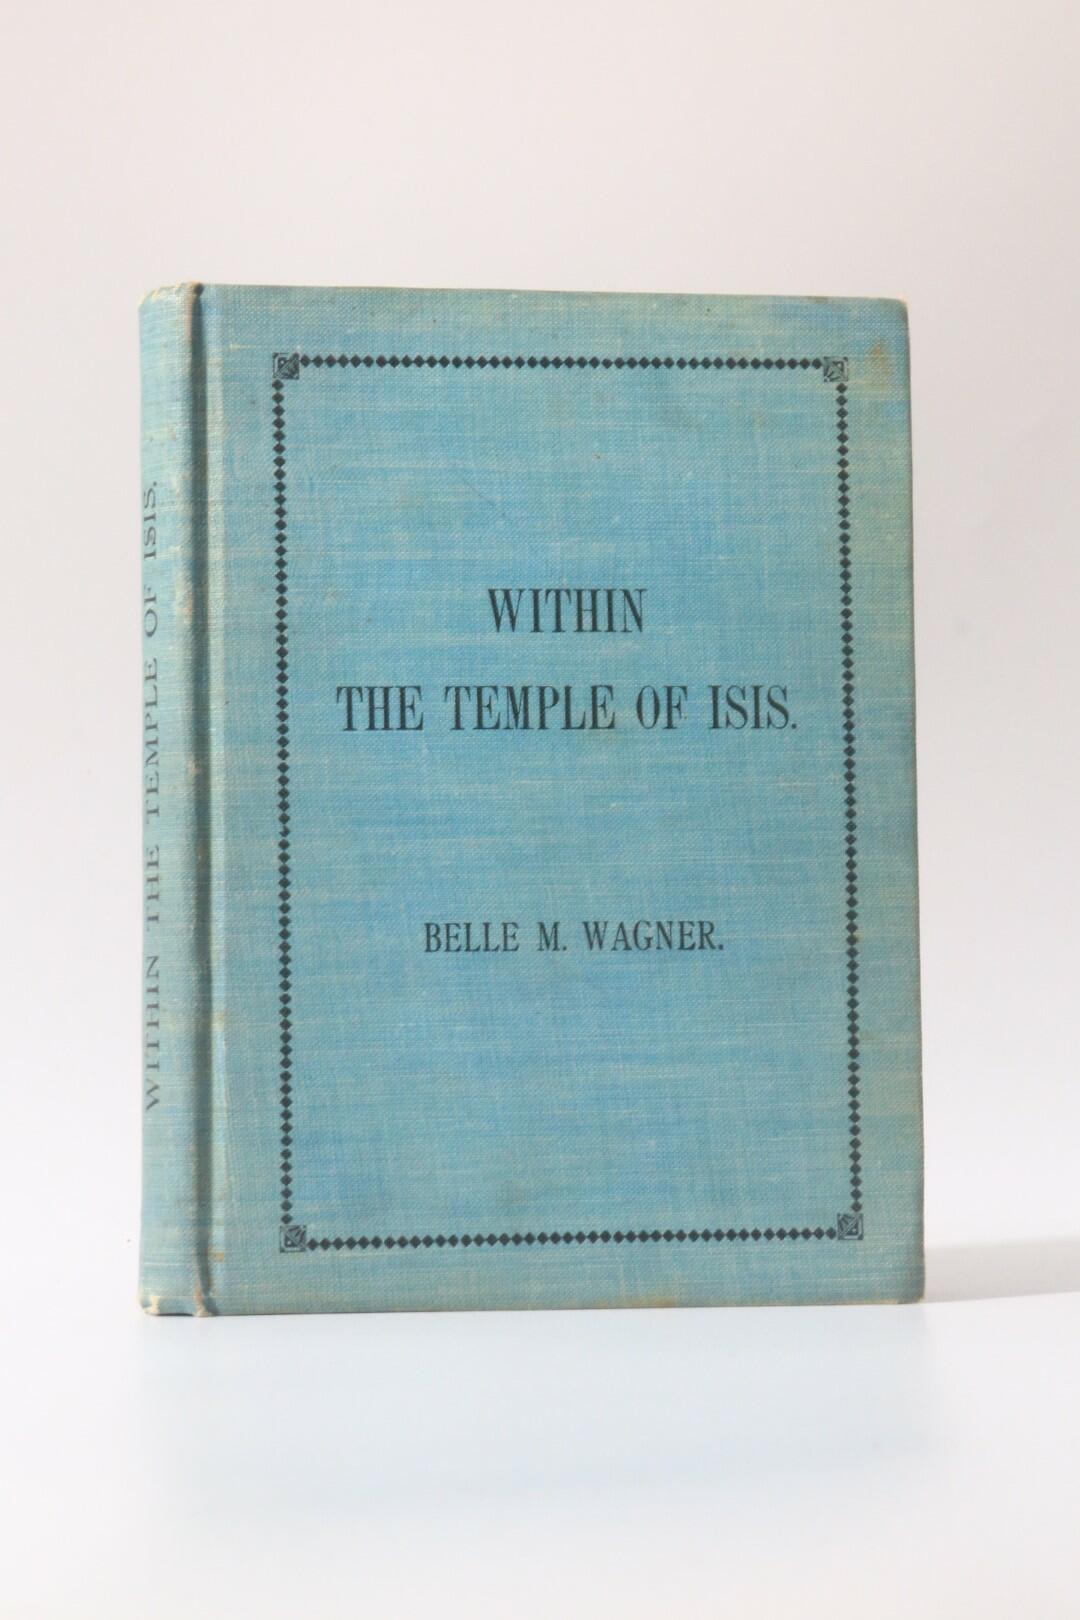 Belle M. Wagner - Within the Temple of Isis - Astro-Philosophical Publishing, 1899, First Edition.